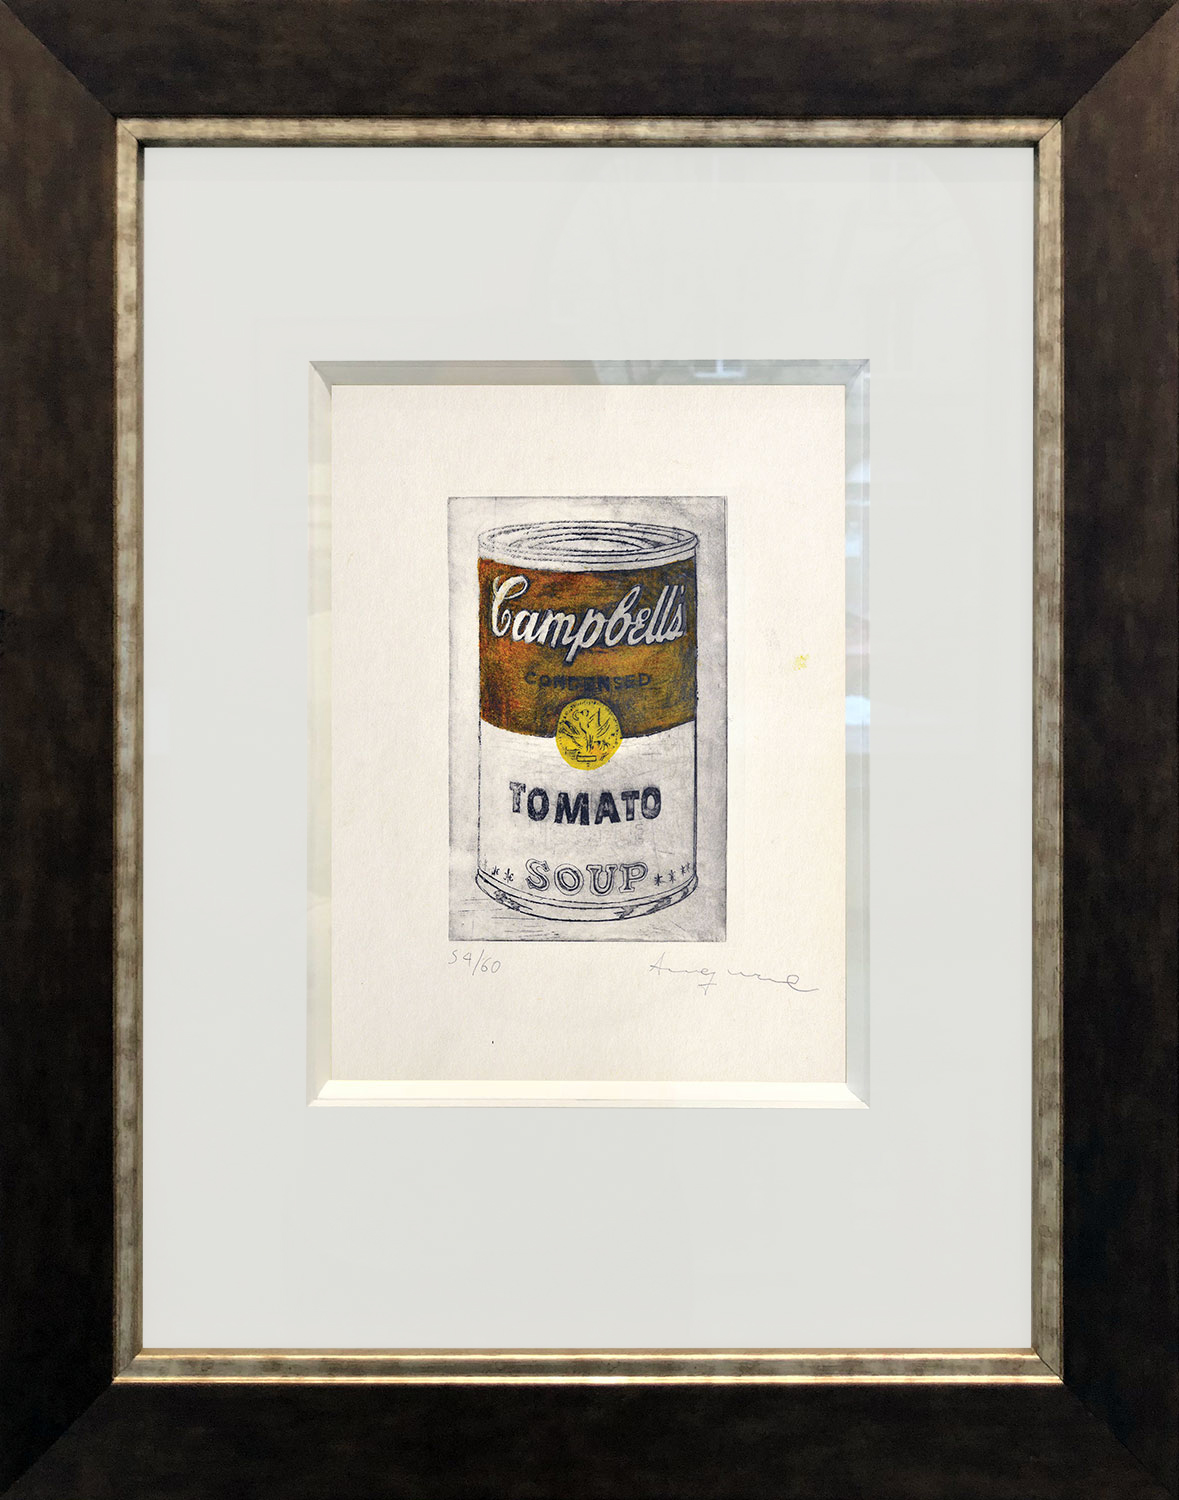 "Campbell’s Tomato Soup Project", 1973 - 1